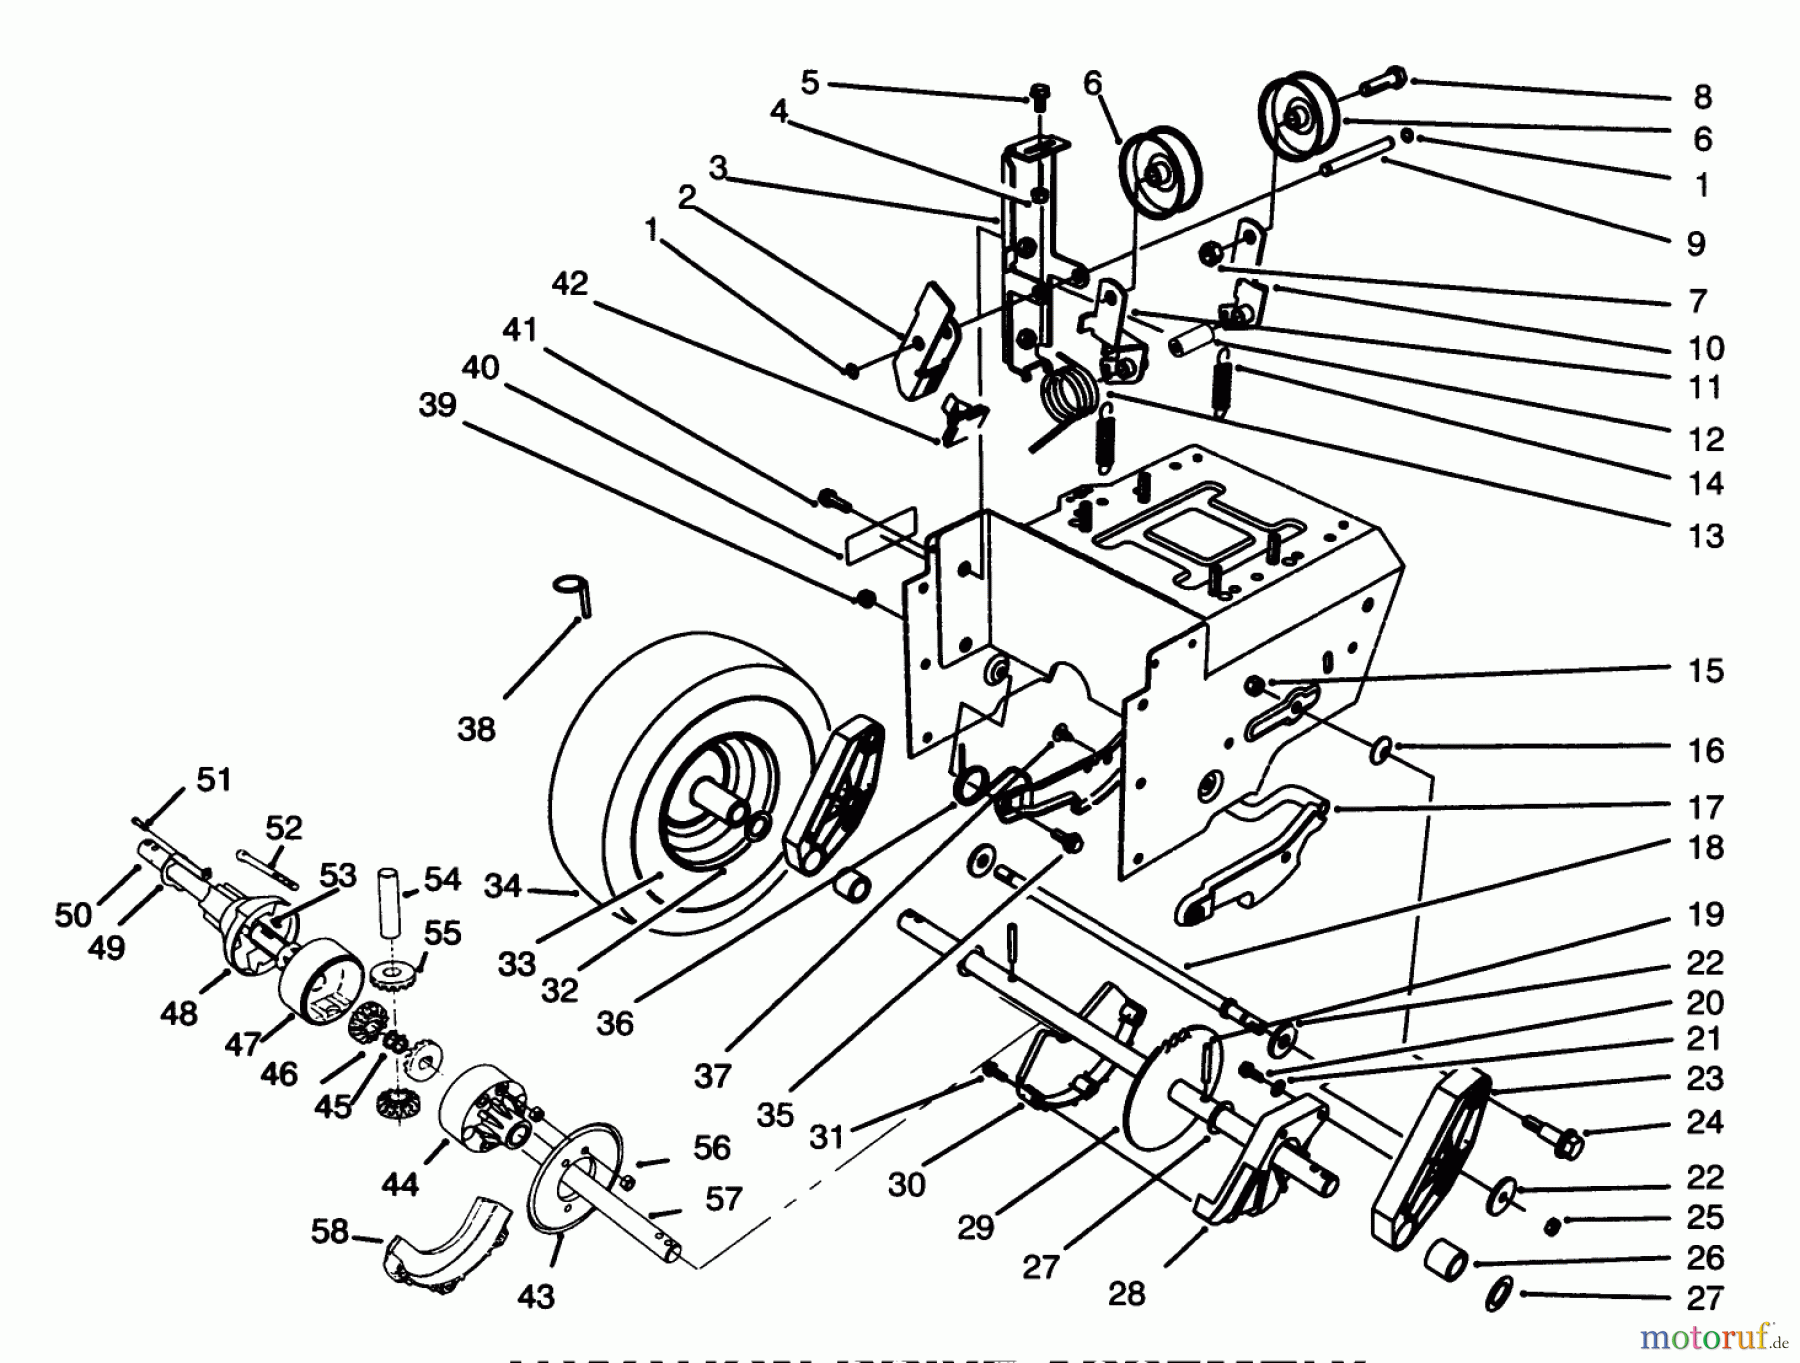  Toro Neu Snow Blowers/Snow Throwers Seite 1 38590 (1232) - Toro 1232 Power Shift Snowthrower, 1996 (6900001-6999999) TRACTION DRIVE ASSEMBLY